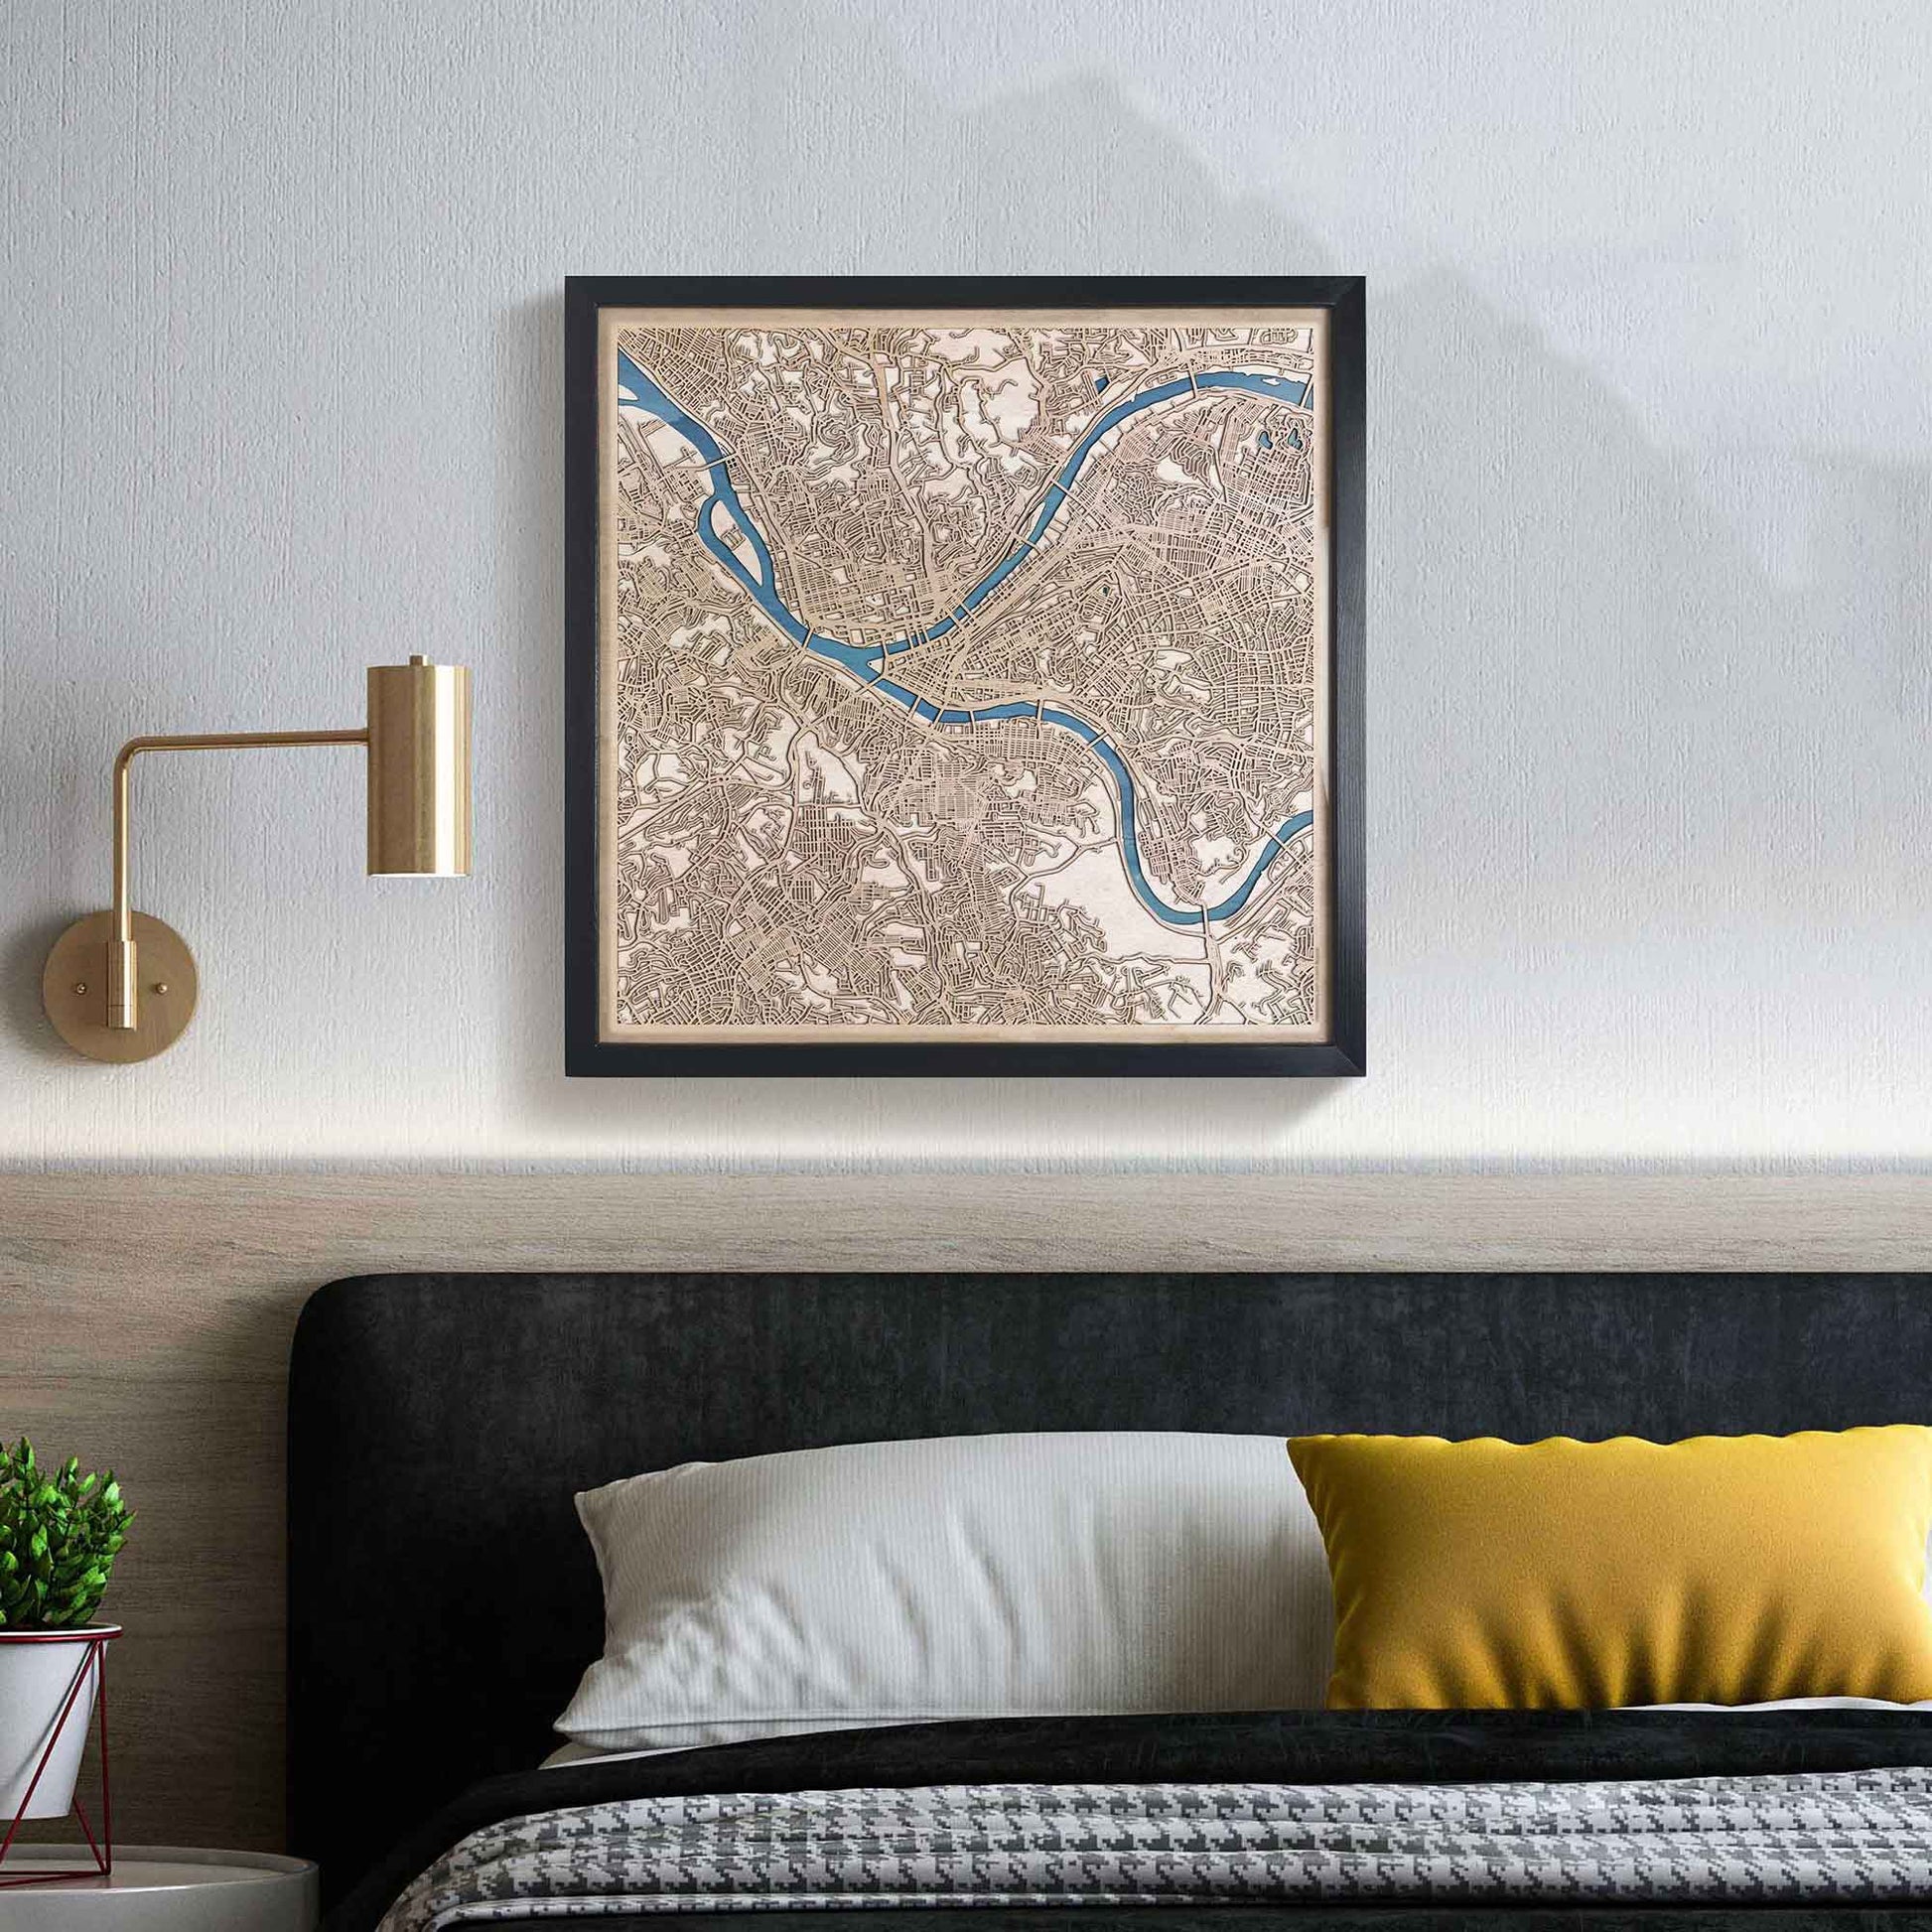 Pittsburgh Wooden Map by CityWood - Custom Wood Map Art - Unique Laser Cut Engraved - Anniversary Gift